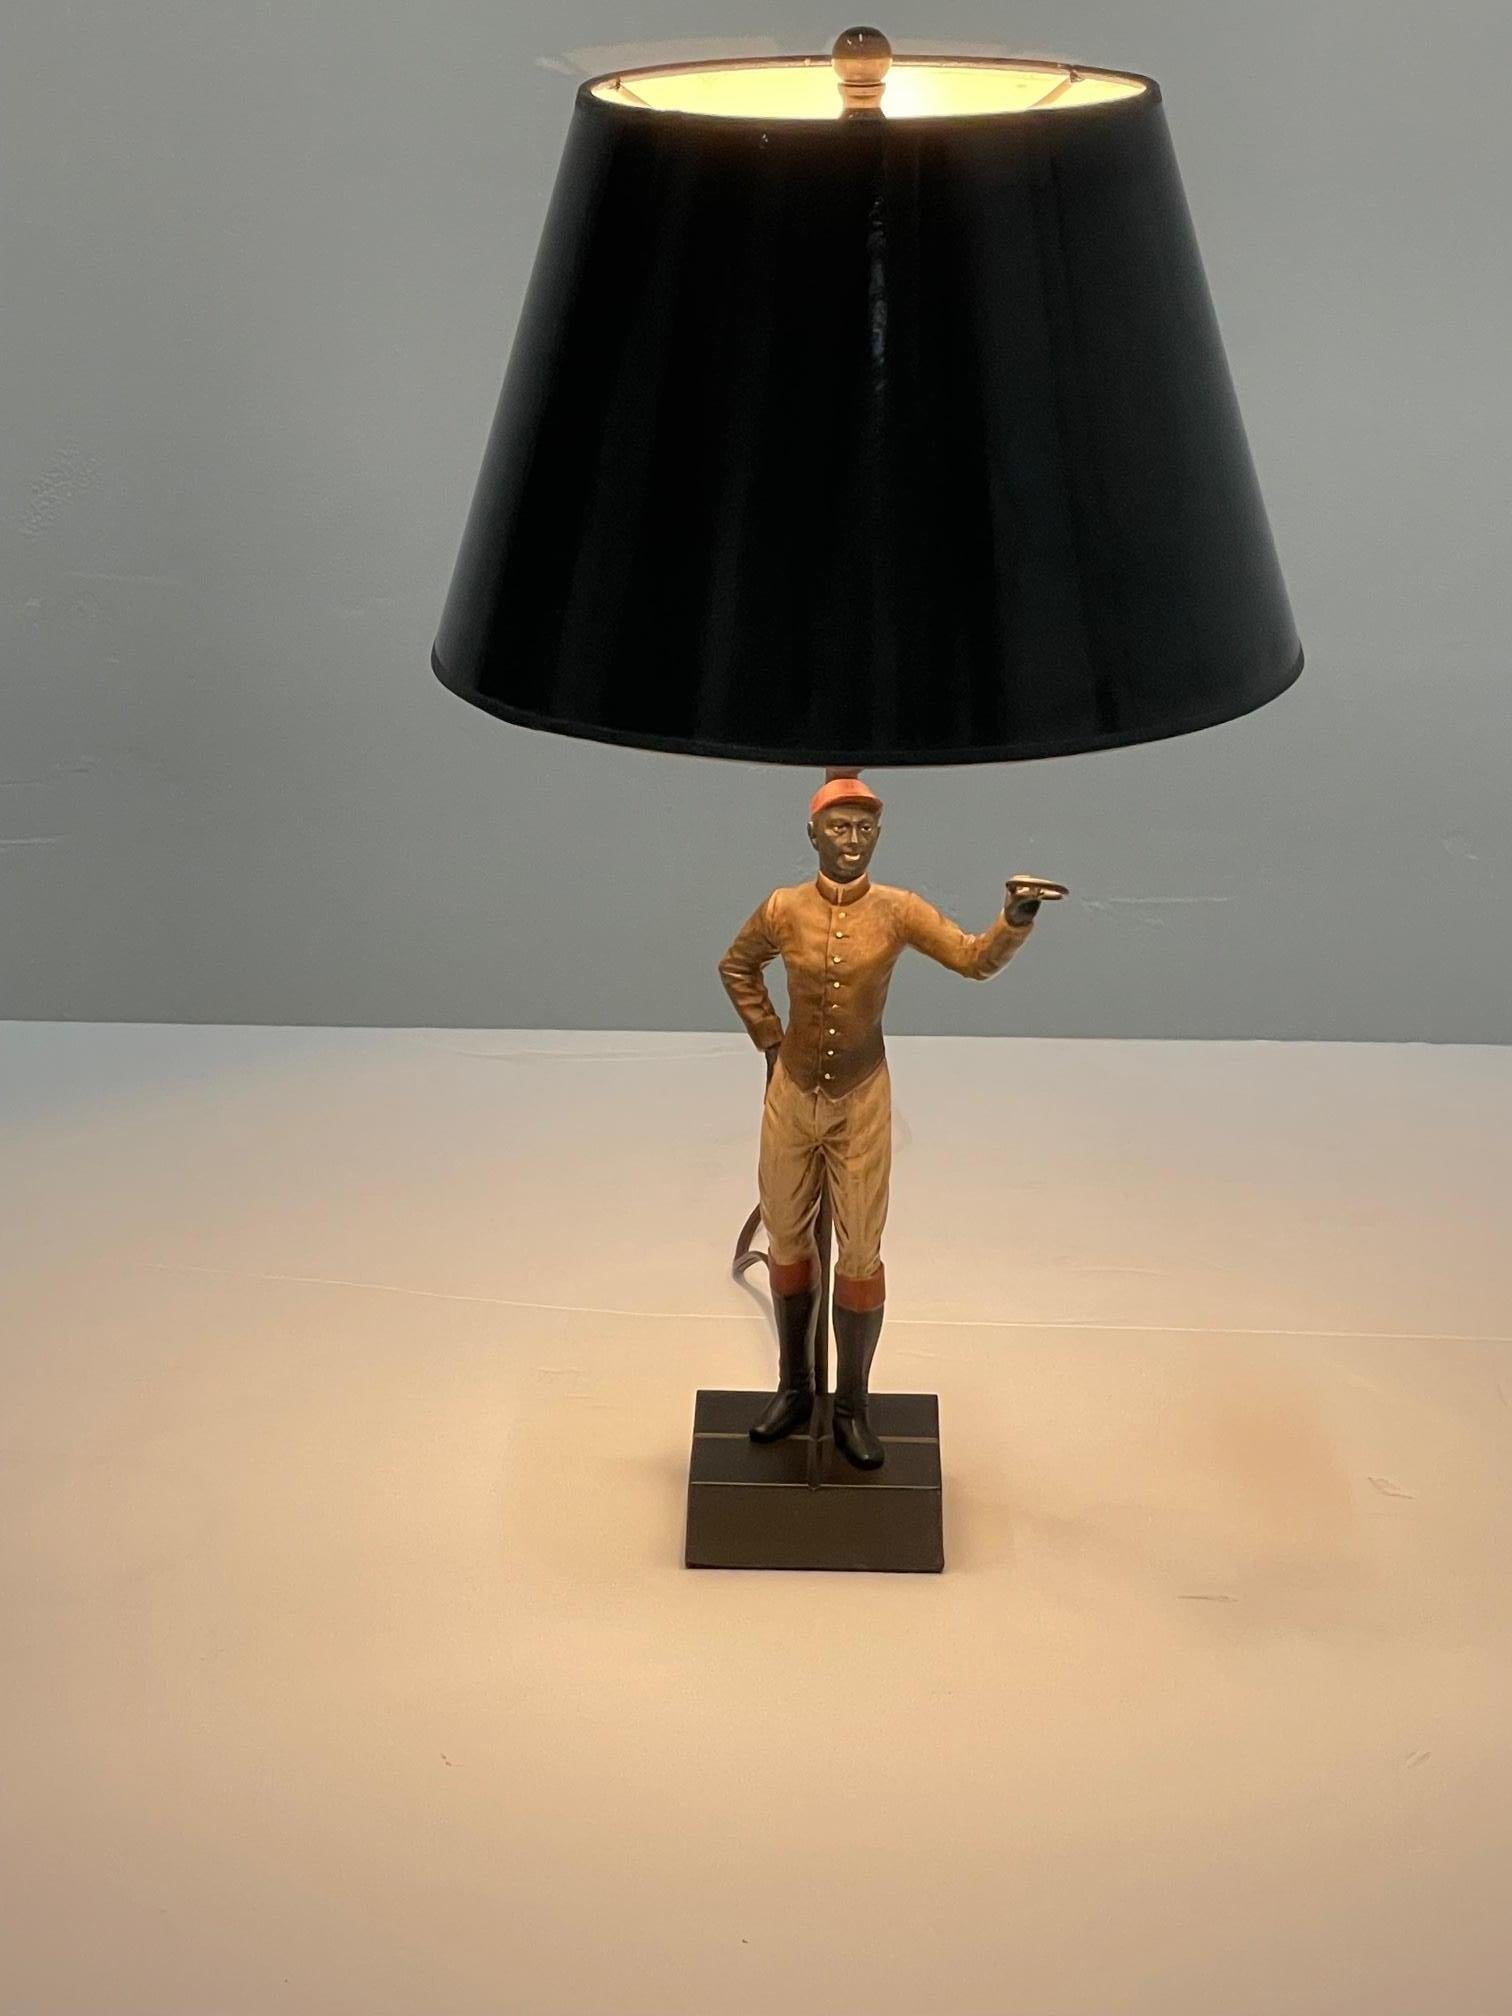 A statuesque well outfitted jockey with red hat and high boots is the sculptural column of this sporty table lamp.
Sculpture is 6